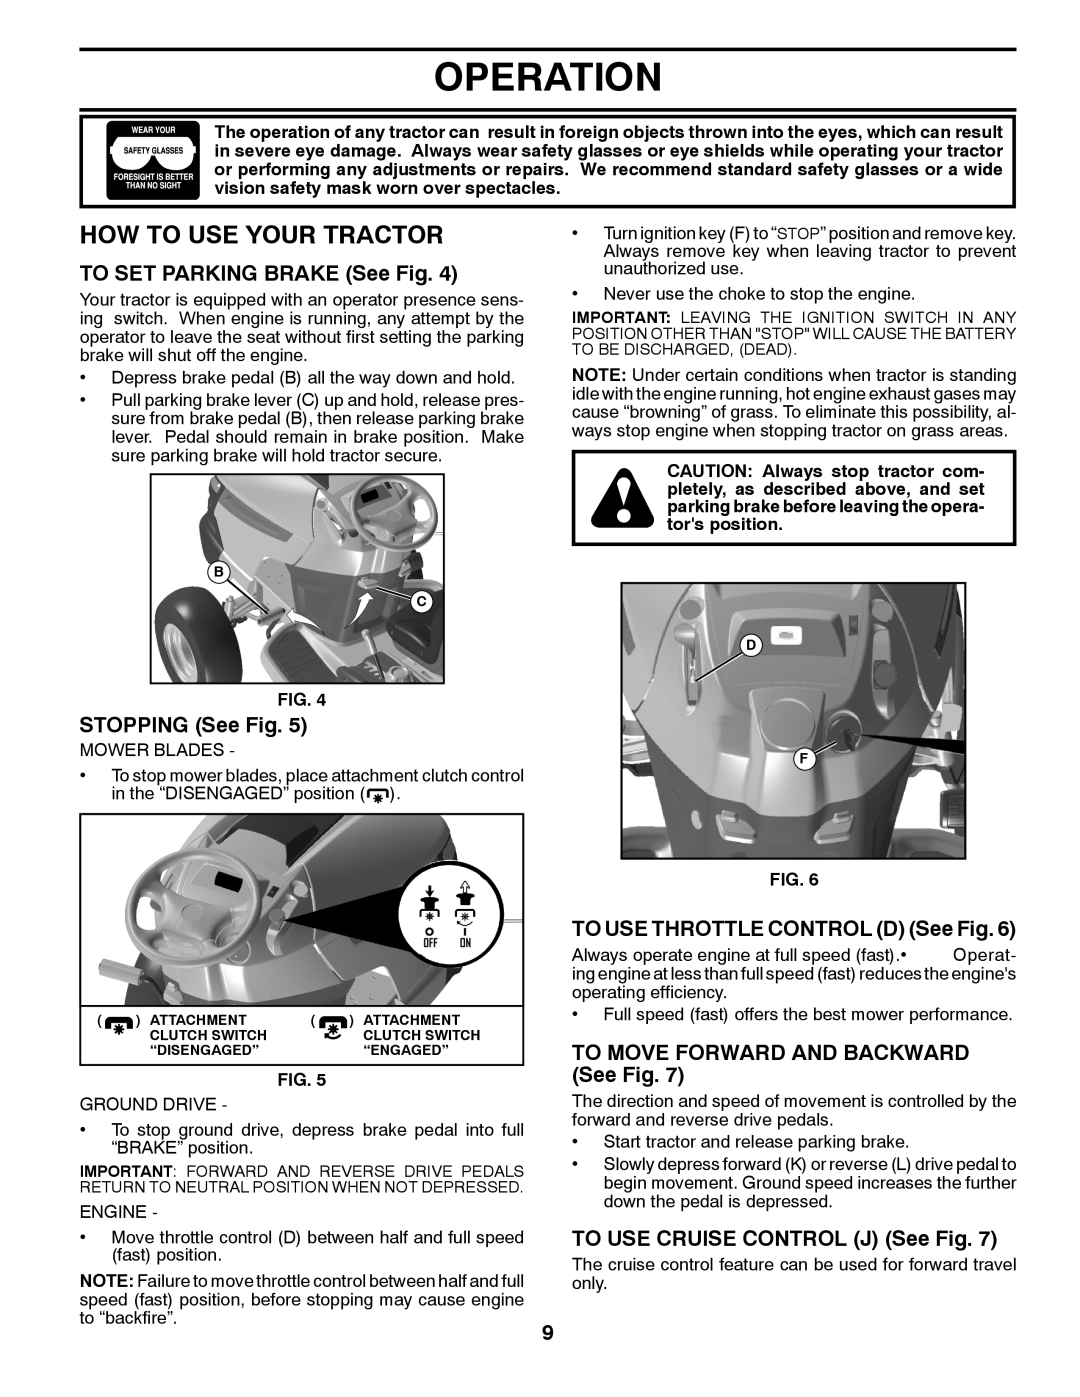 Husqvarna 532 43 62-68, 96045002201 How To Use Your Tractor, TO SET PARKING BRAKE See Fig, STOPPING See Fig, Operation 